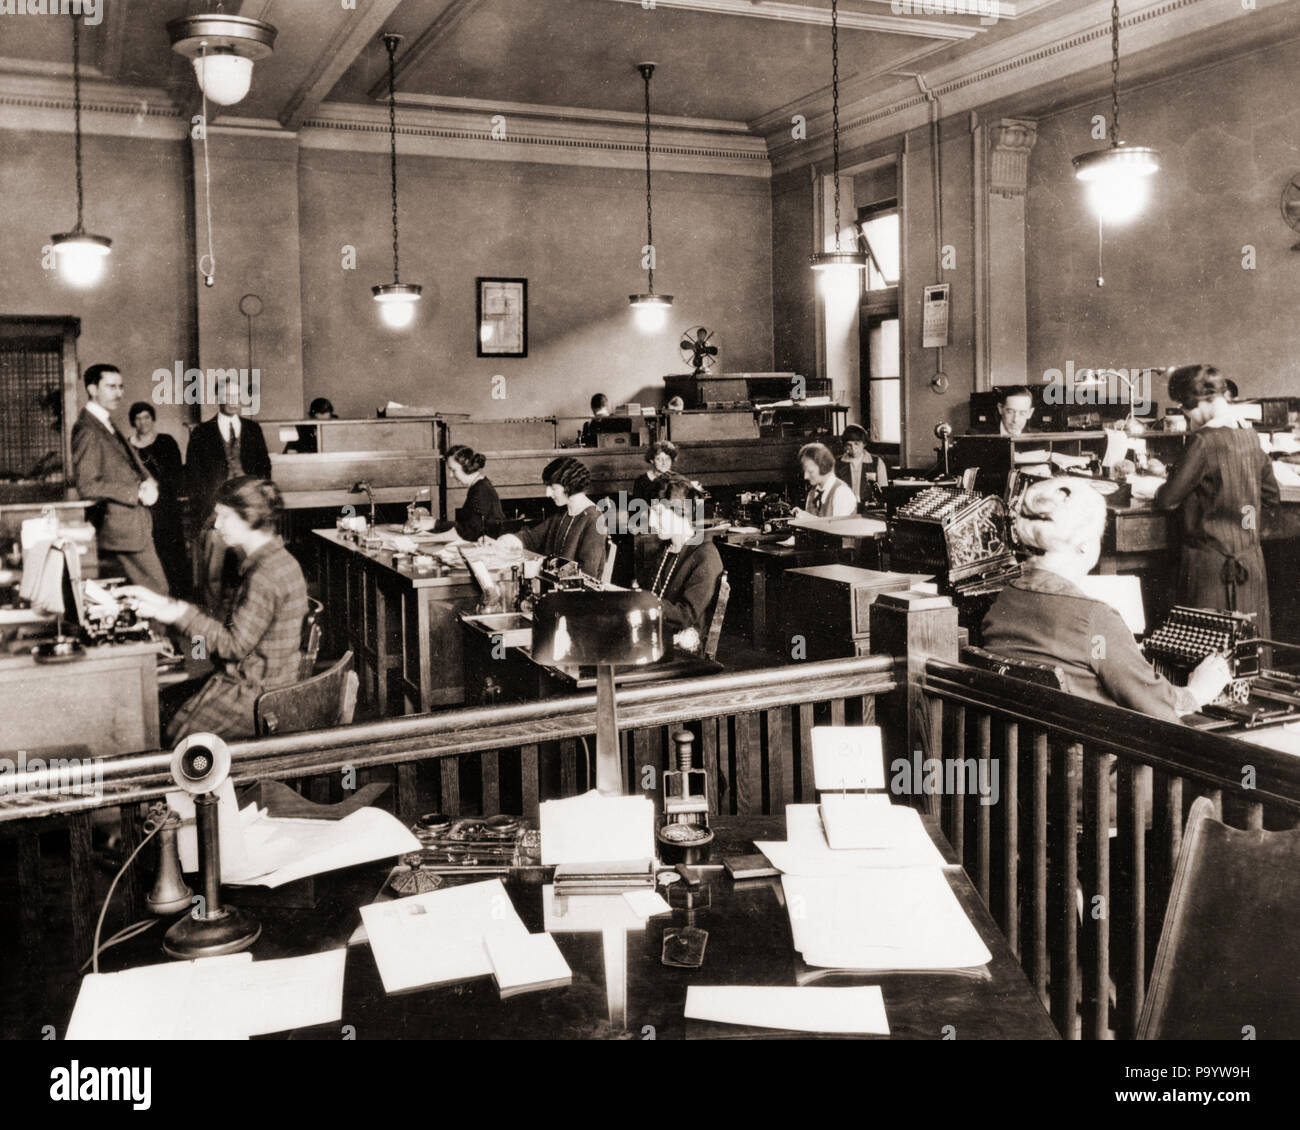 1910s 1920s BUSINESS OFFICE WITH WOMEN SITTING AT DESKS IN BULLPEN AREA -  o2383 SPL001 HARS COPY SPACE HALF-LENGTH LADIES PERSONS MALES PROFESSION  B&W DESKS MEN AND WOMEN DECOR OCCUPATION TYPING AND